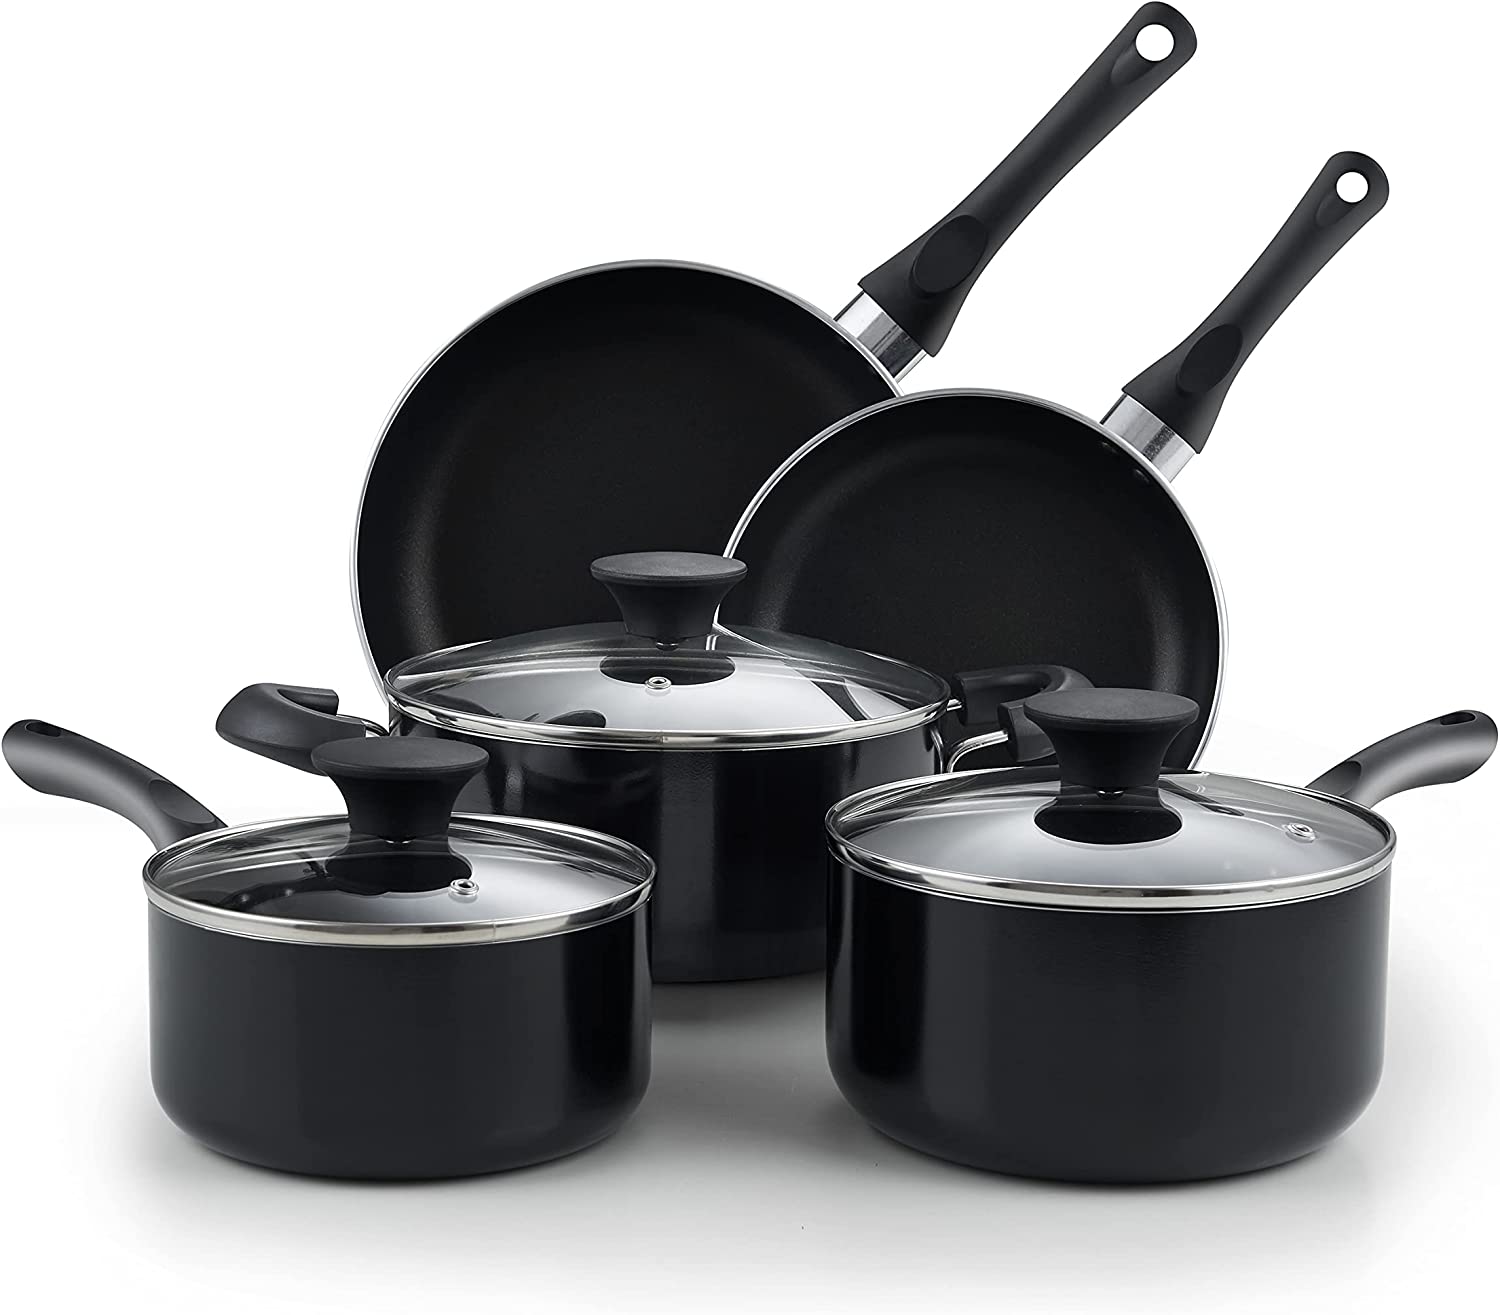 Cook N Home Non-Stick Basic Kitchen Cookware Pots and Pans Set, Stay Cool  Handle, Black, 8-Piece